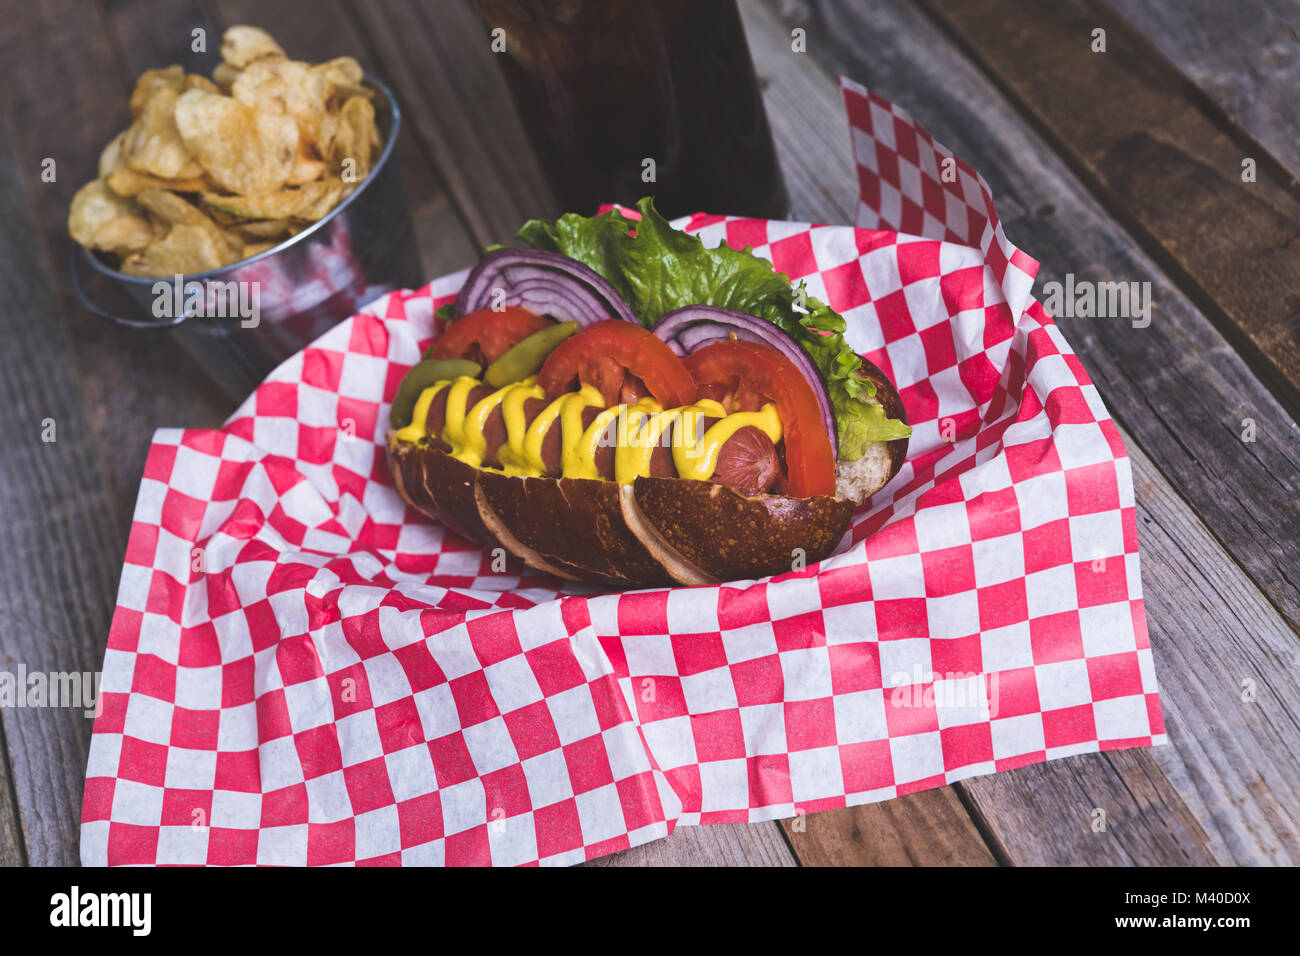 Gourmet hot dog with chips and drink in a basket with gingham napkin. Tabletop, side view. Stock Photo